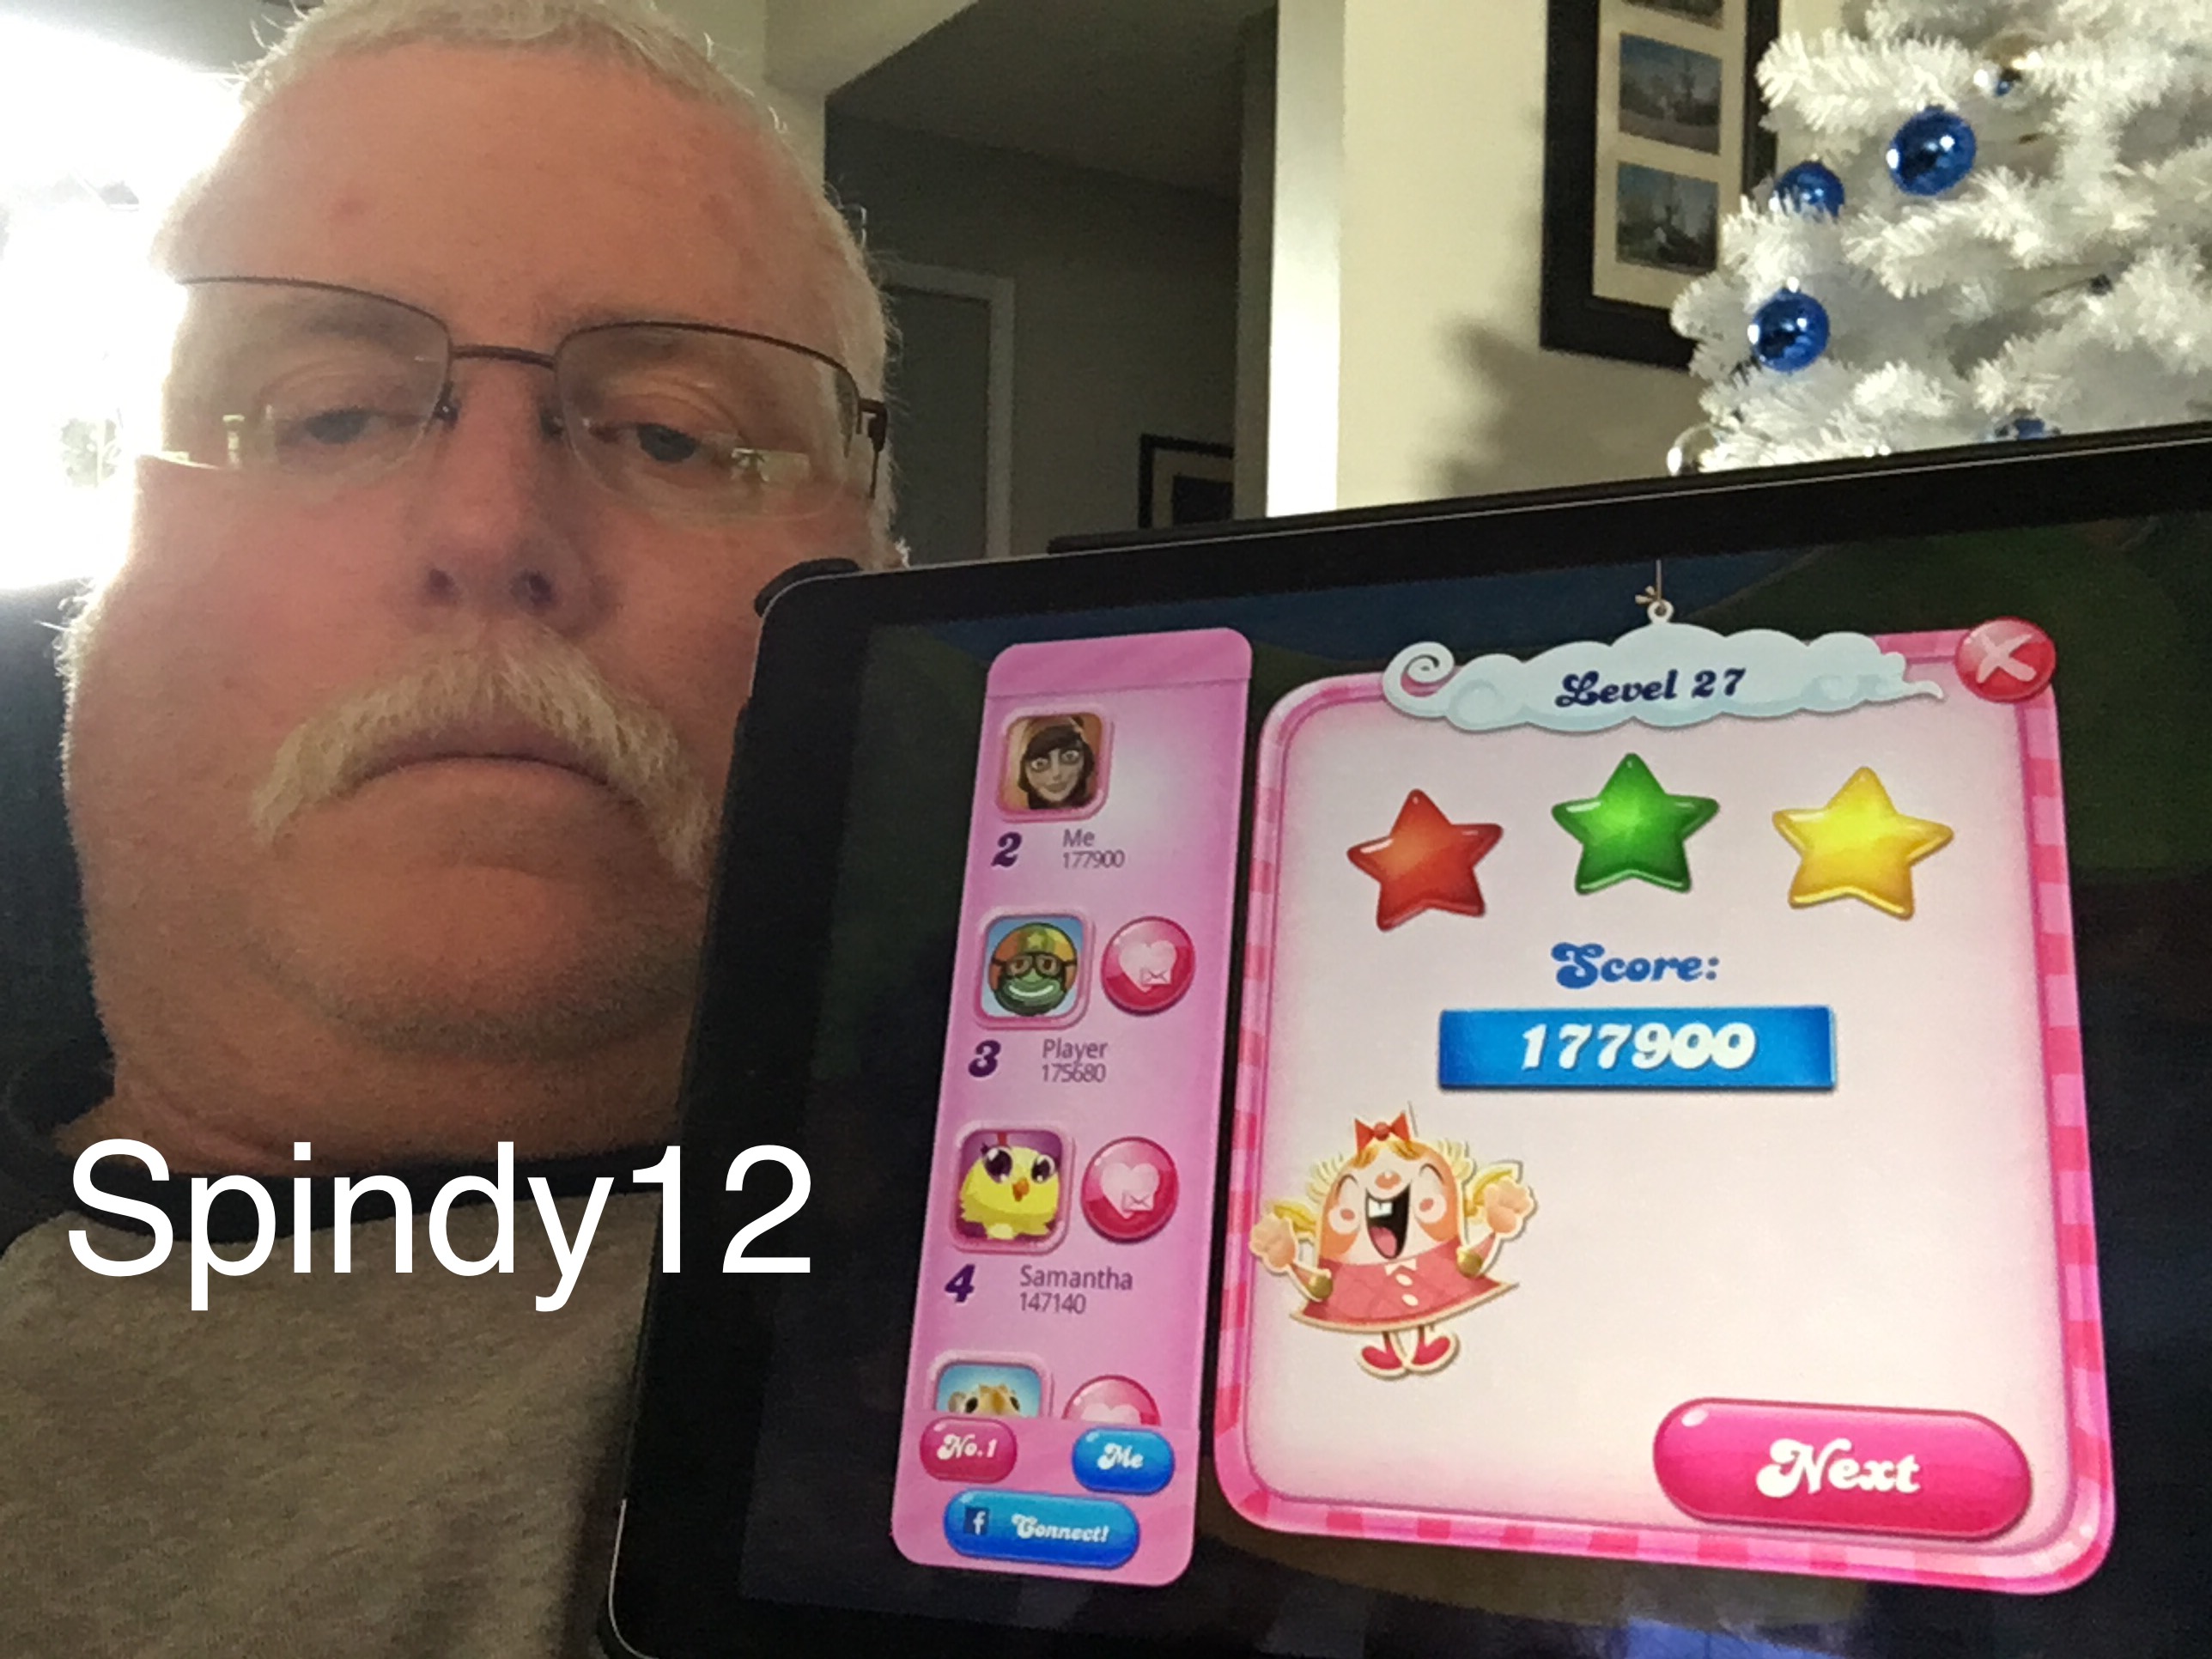 Spindy12: Candy Crush Saga: Level 027 (iOS) 177,900 points on 2016-12-21 17:30:43